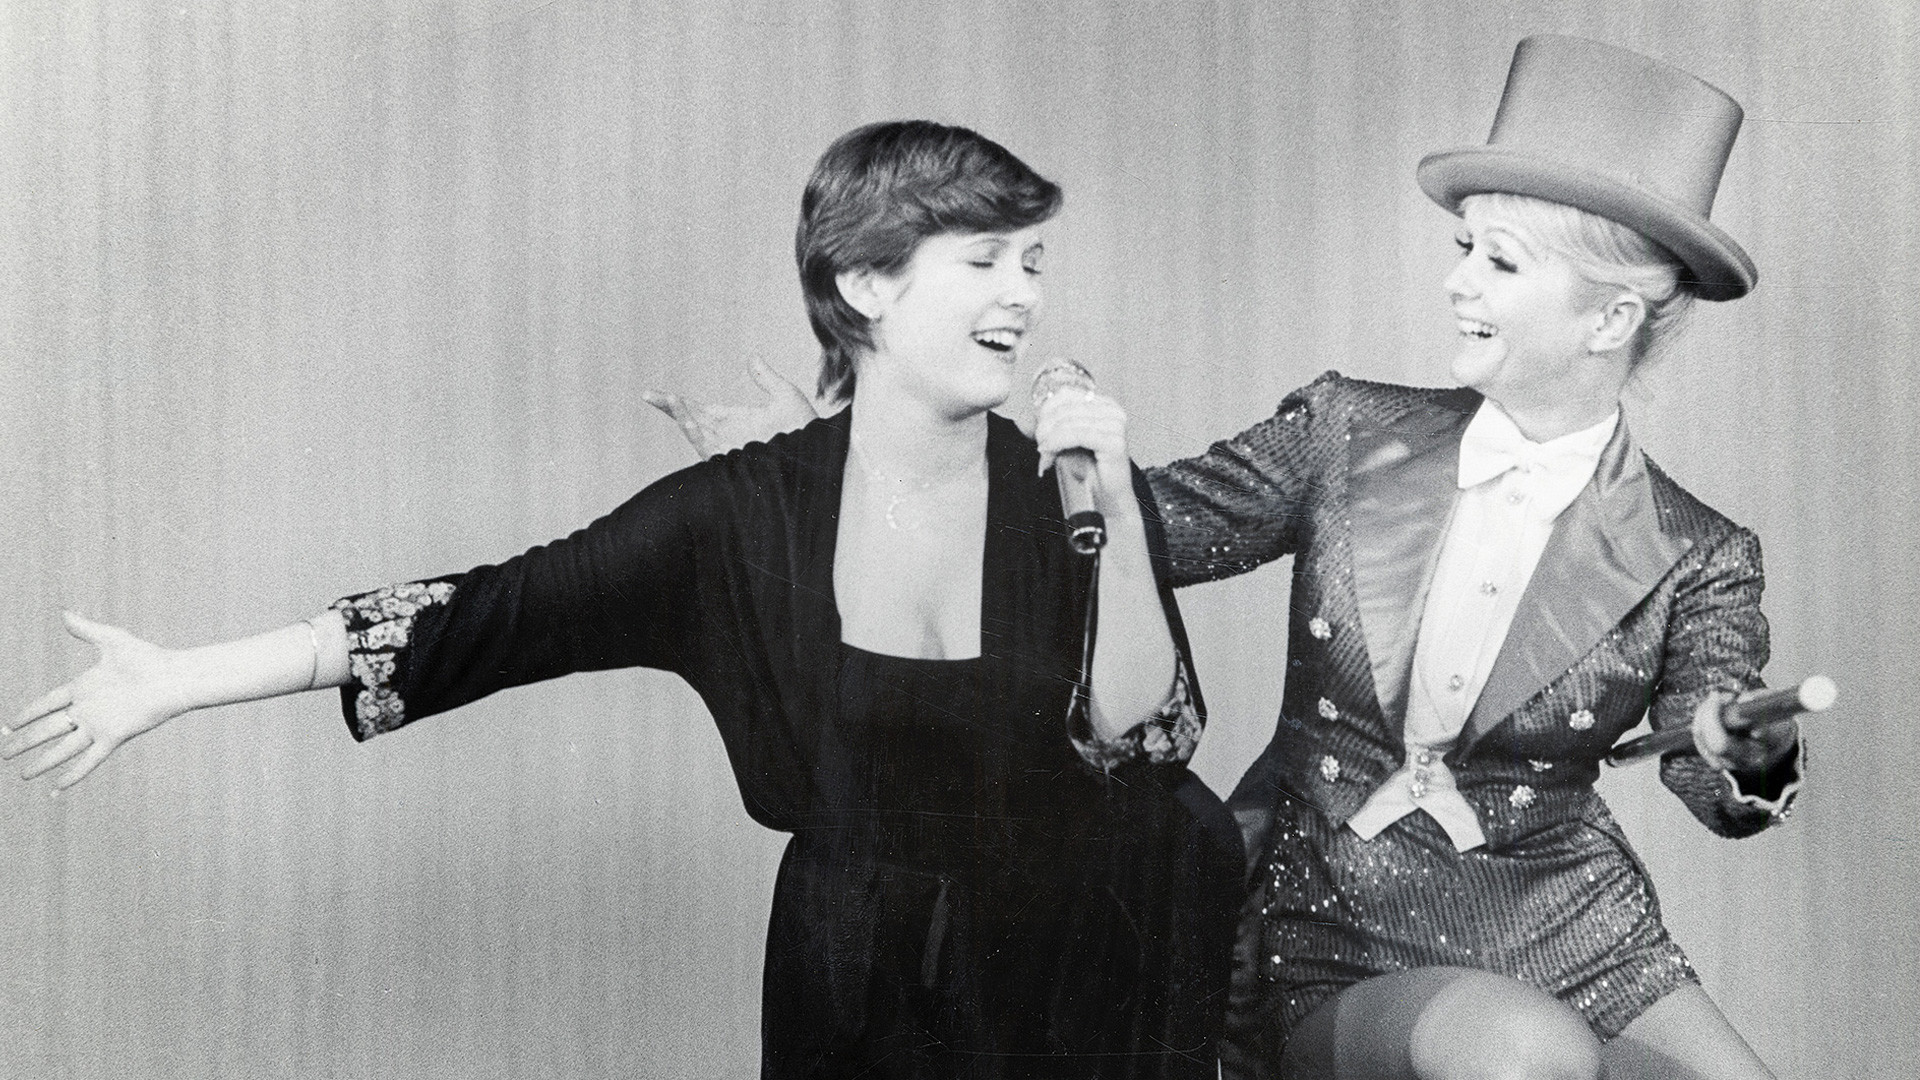 Bright Lights Starring Carrie Fisher And Debbie Reynolds 1920x1080